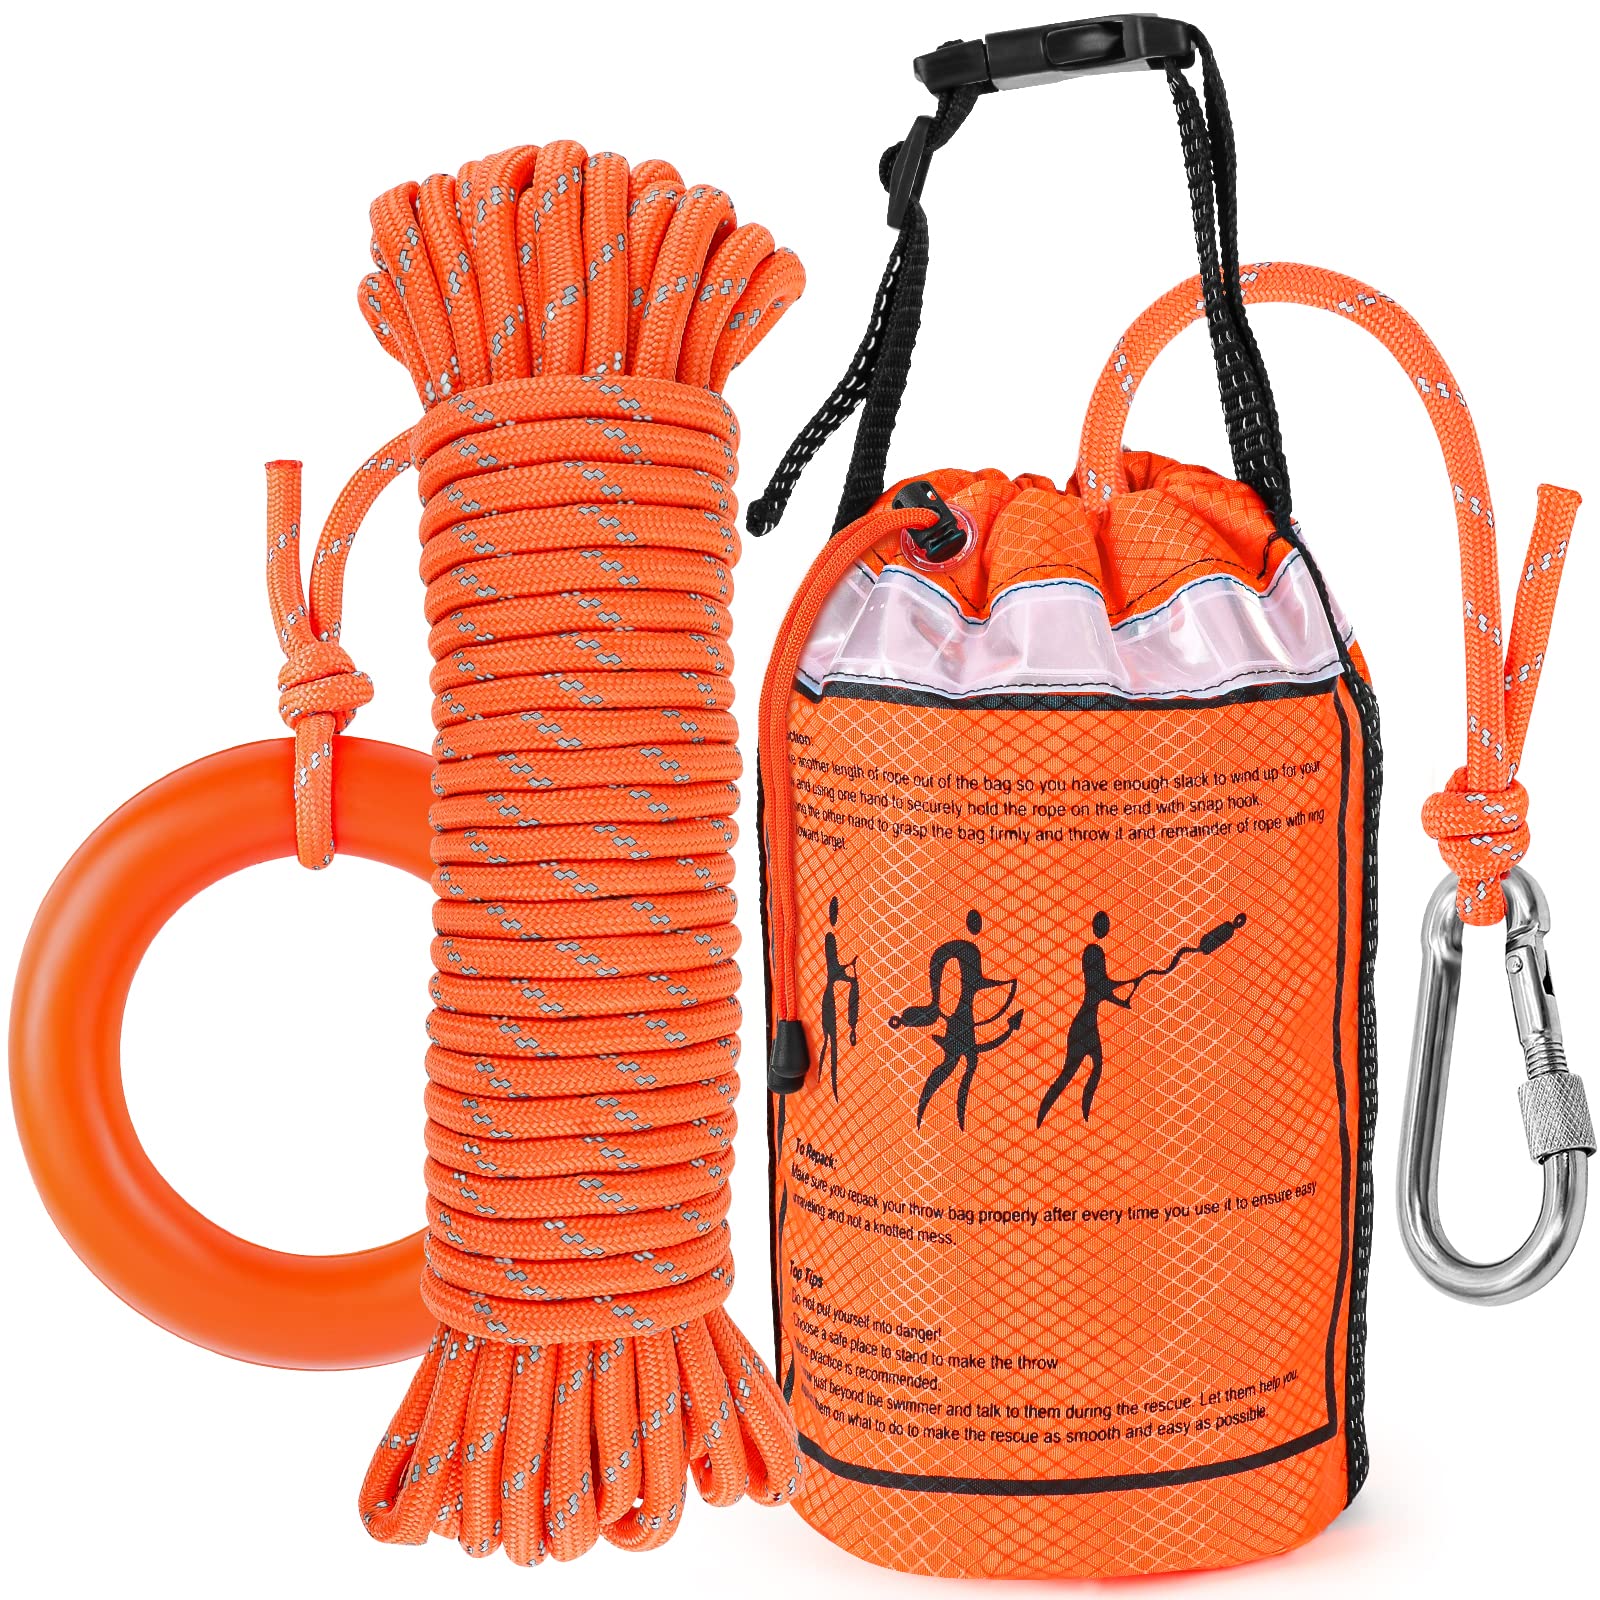 Rescue Rope Throw Bag  Best Marine & Outdoors